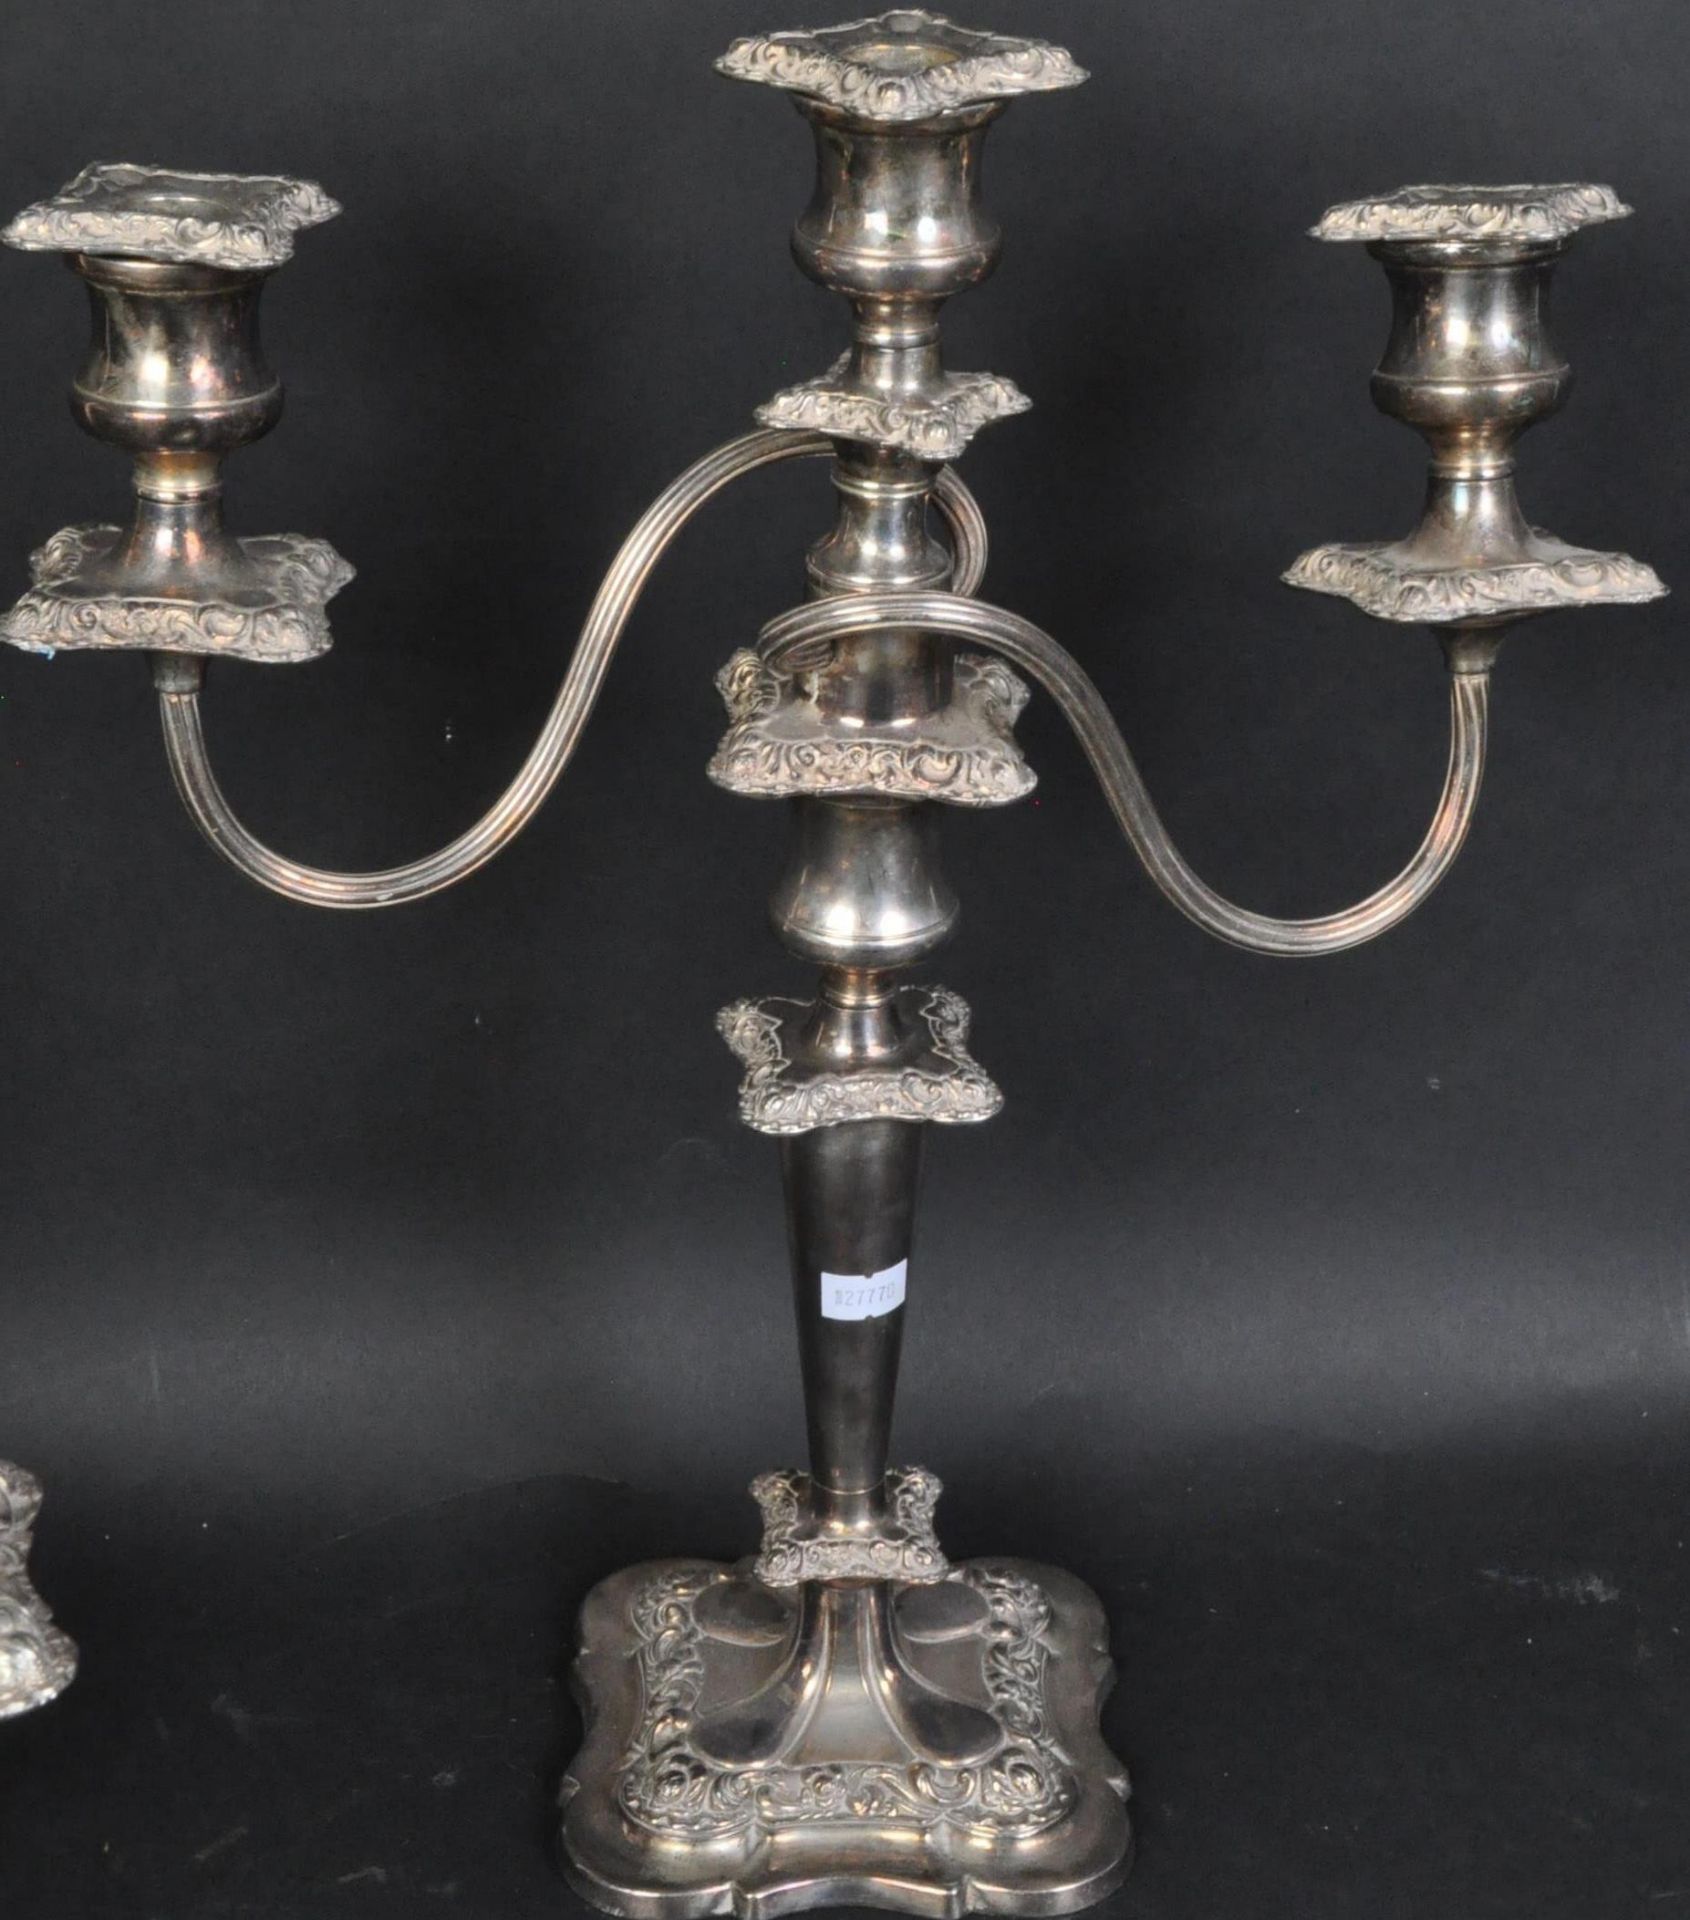 PAIR OF VINTAGE SILVER PLATED CANDLESTICK CANDELABRAS - Image 2 of 5